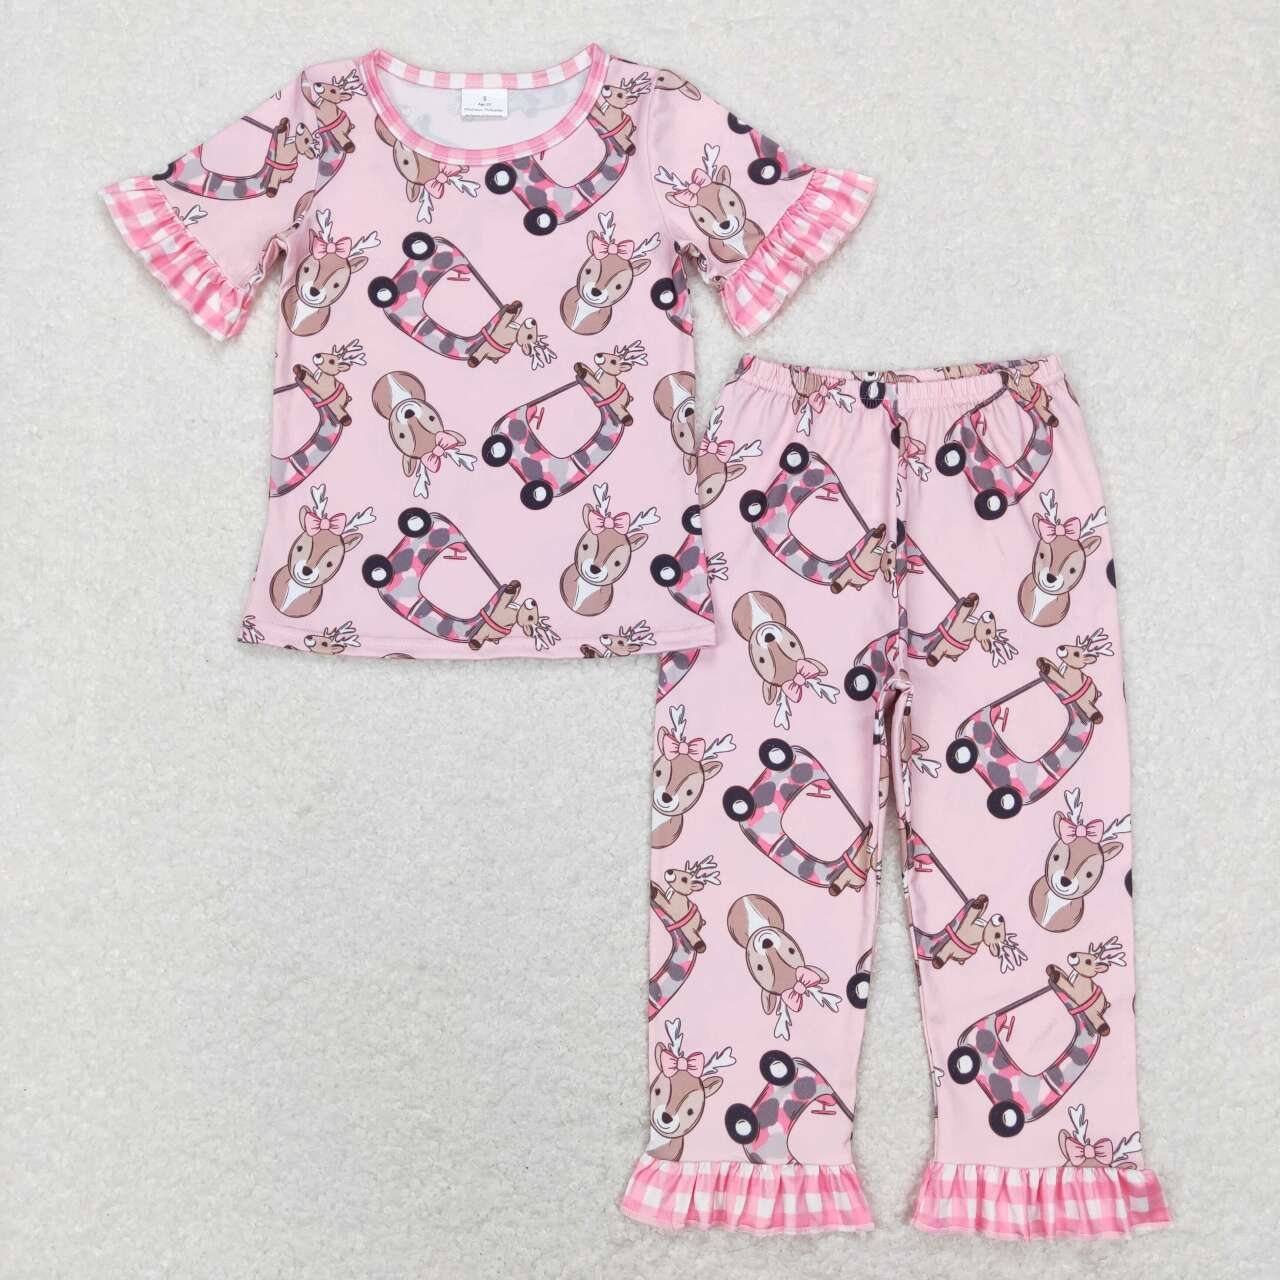 GSPO1100 Deer camouflage car pink and white plaid lace pink short-sleeved trousers outfits